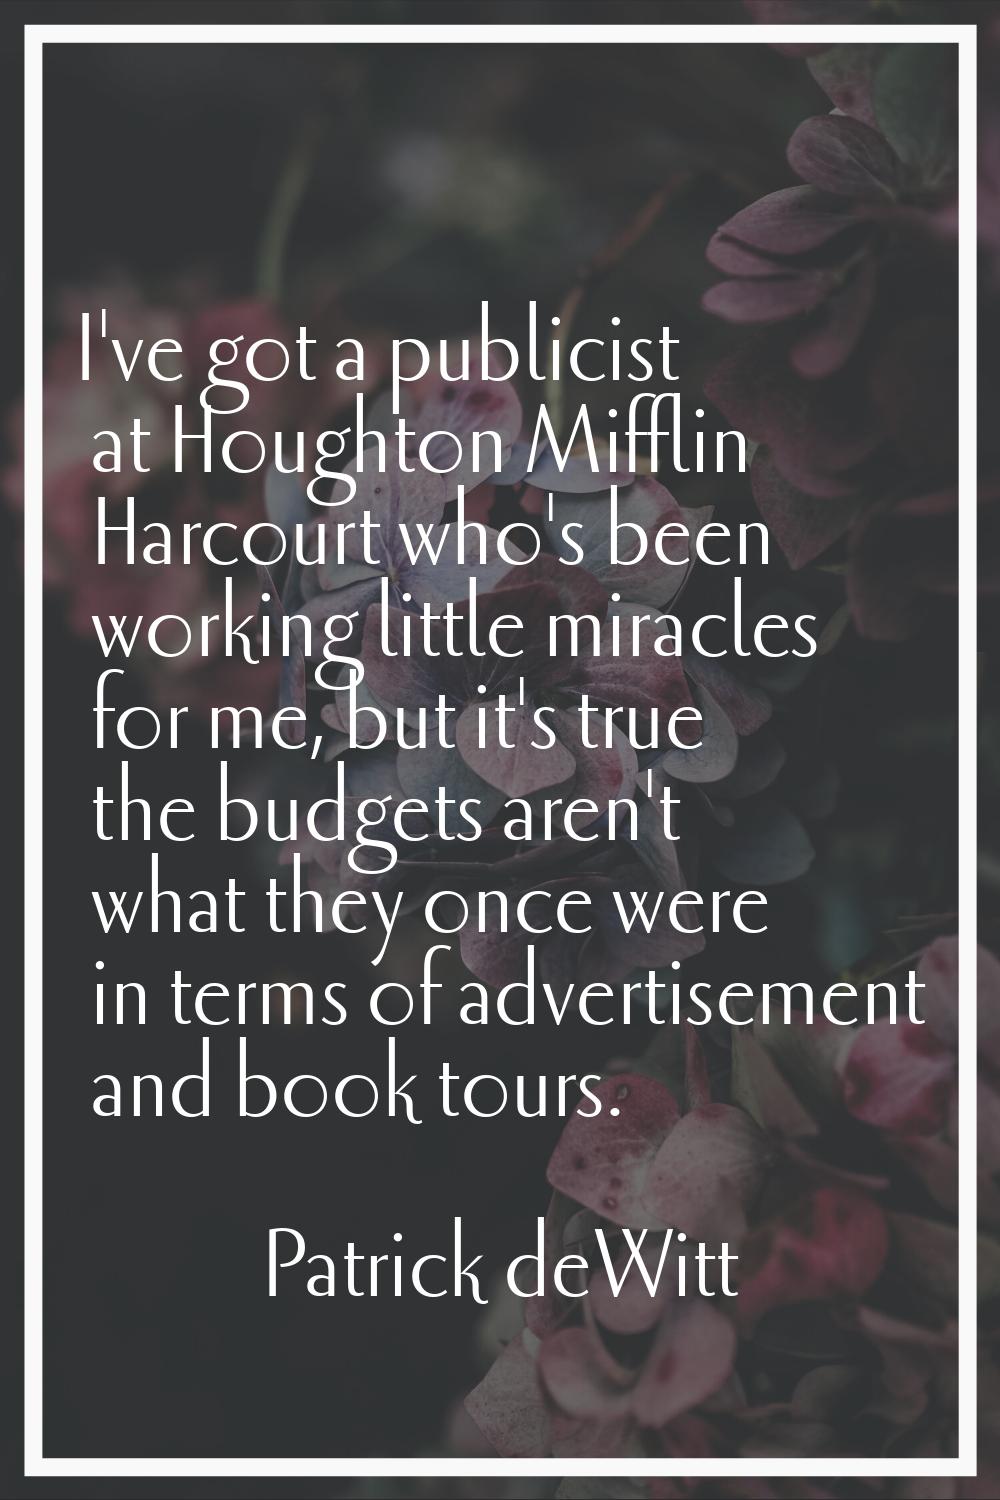 I've got a publicist at Houghton Mifflin Harcourt who's been working little miracles for me, but it